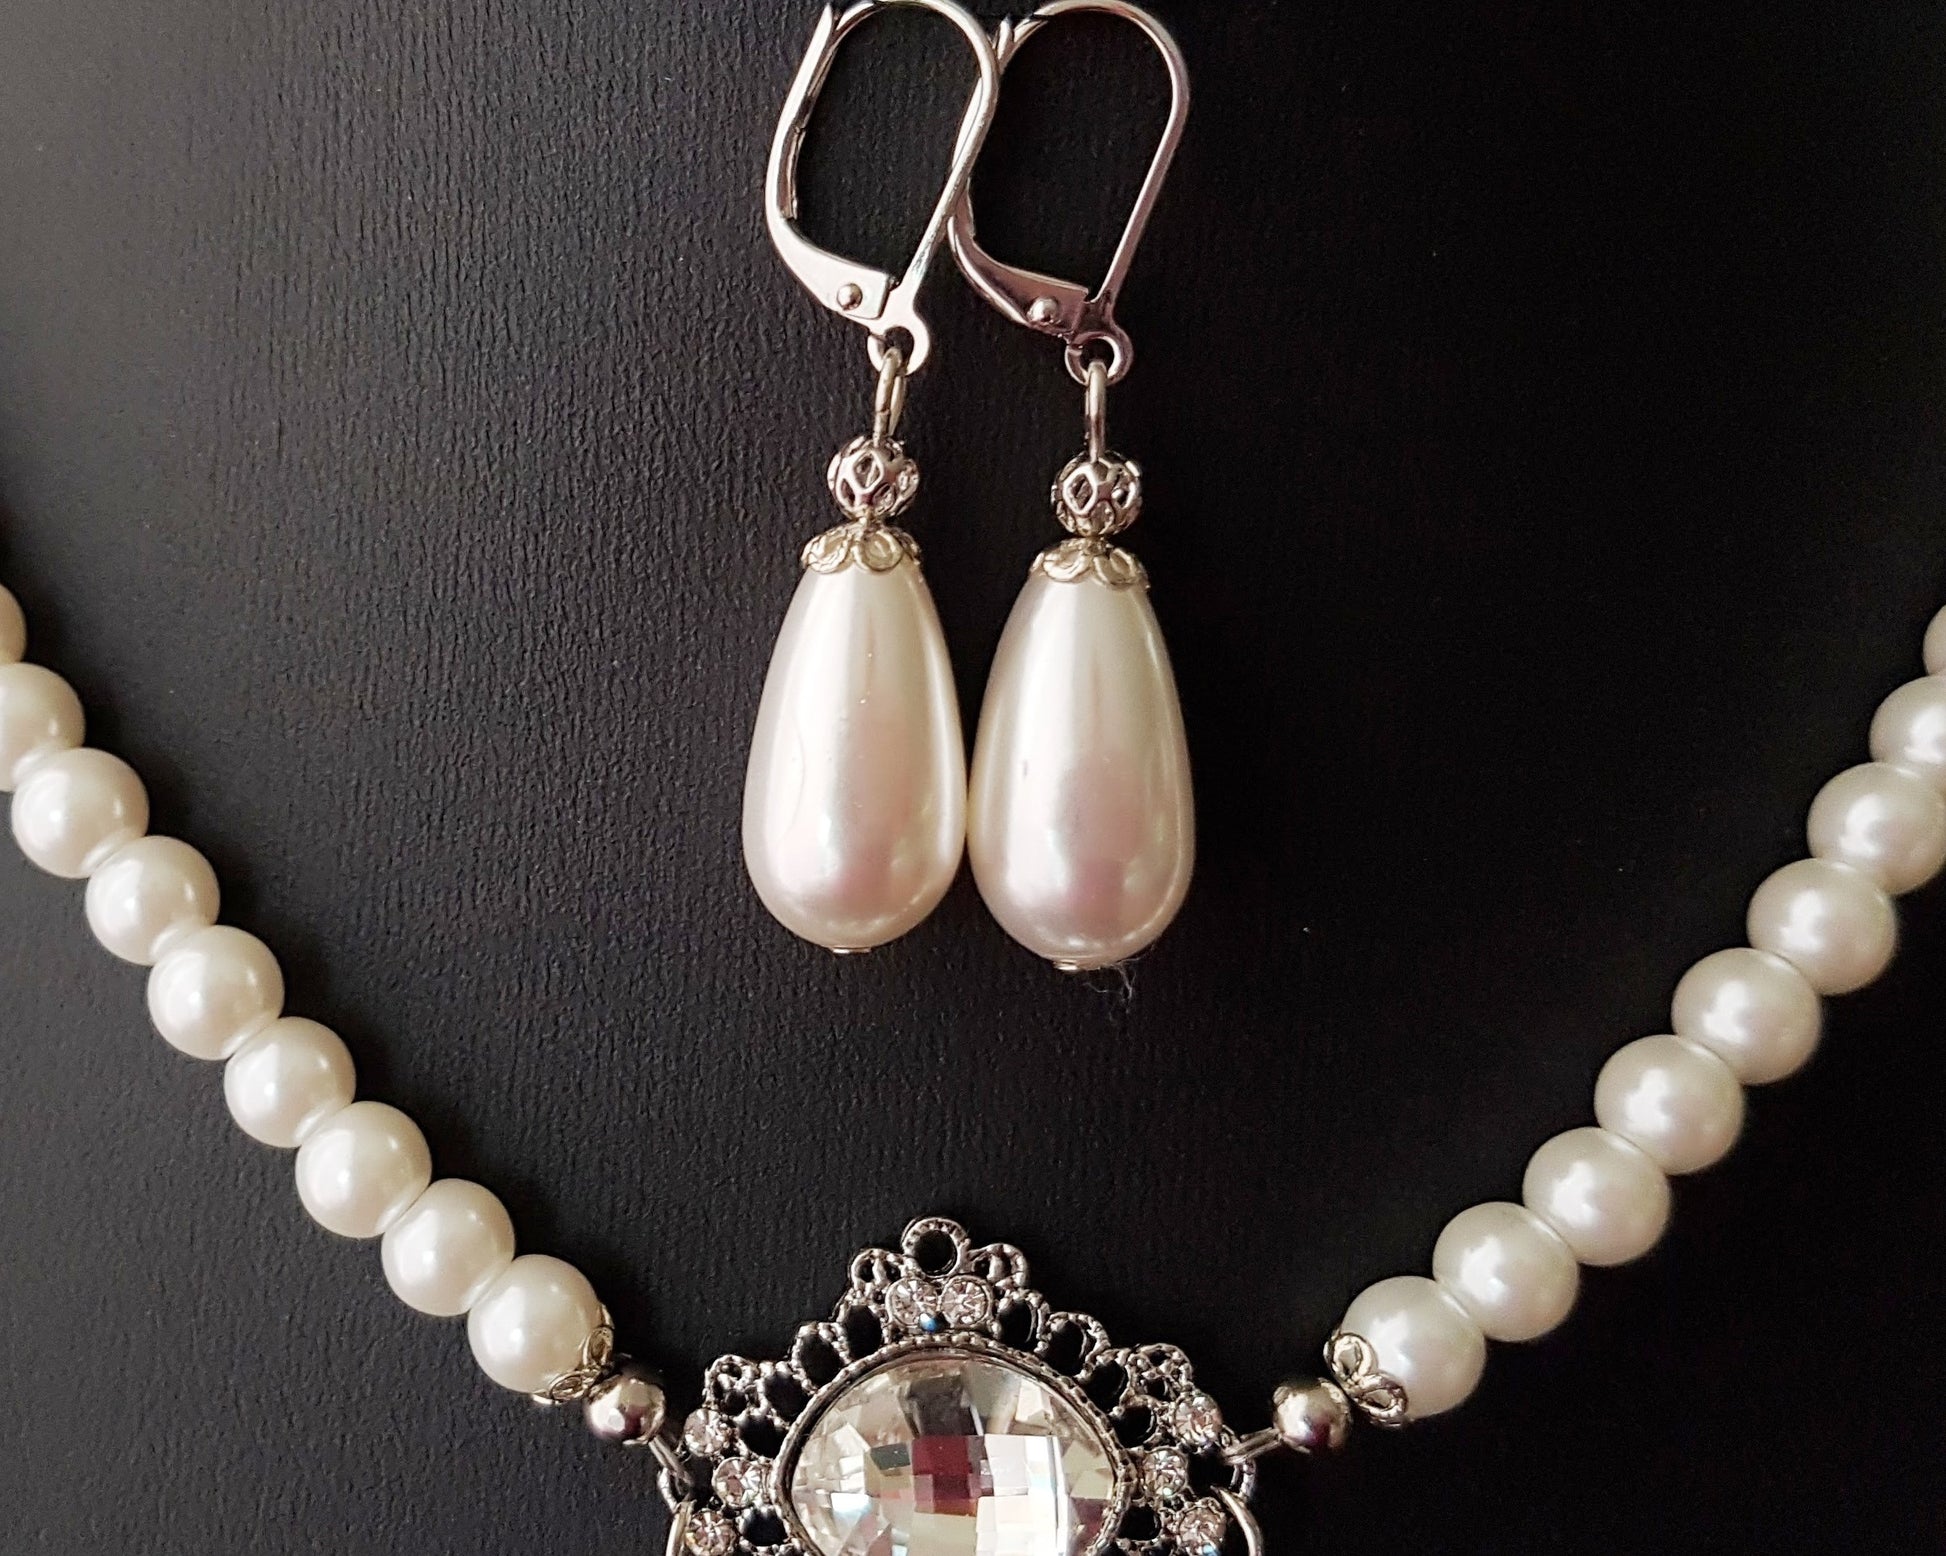 earrings are drop shaped pearls, displayed on black. 